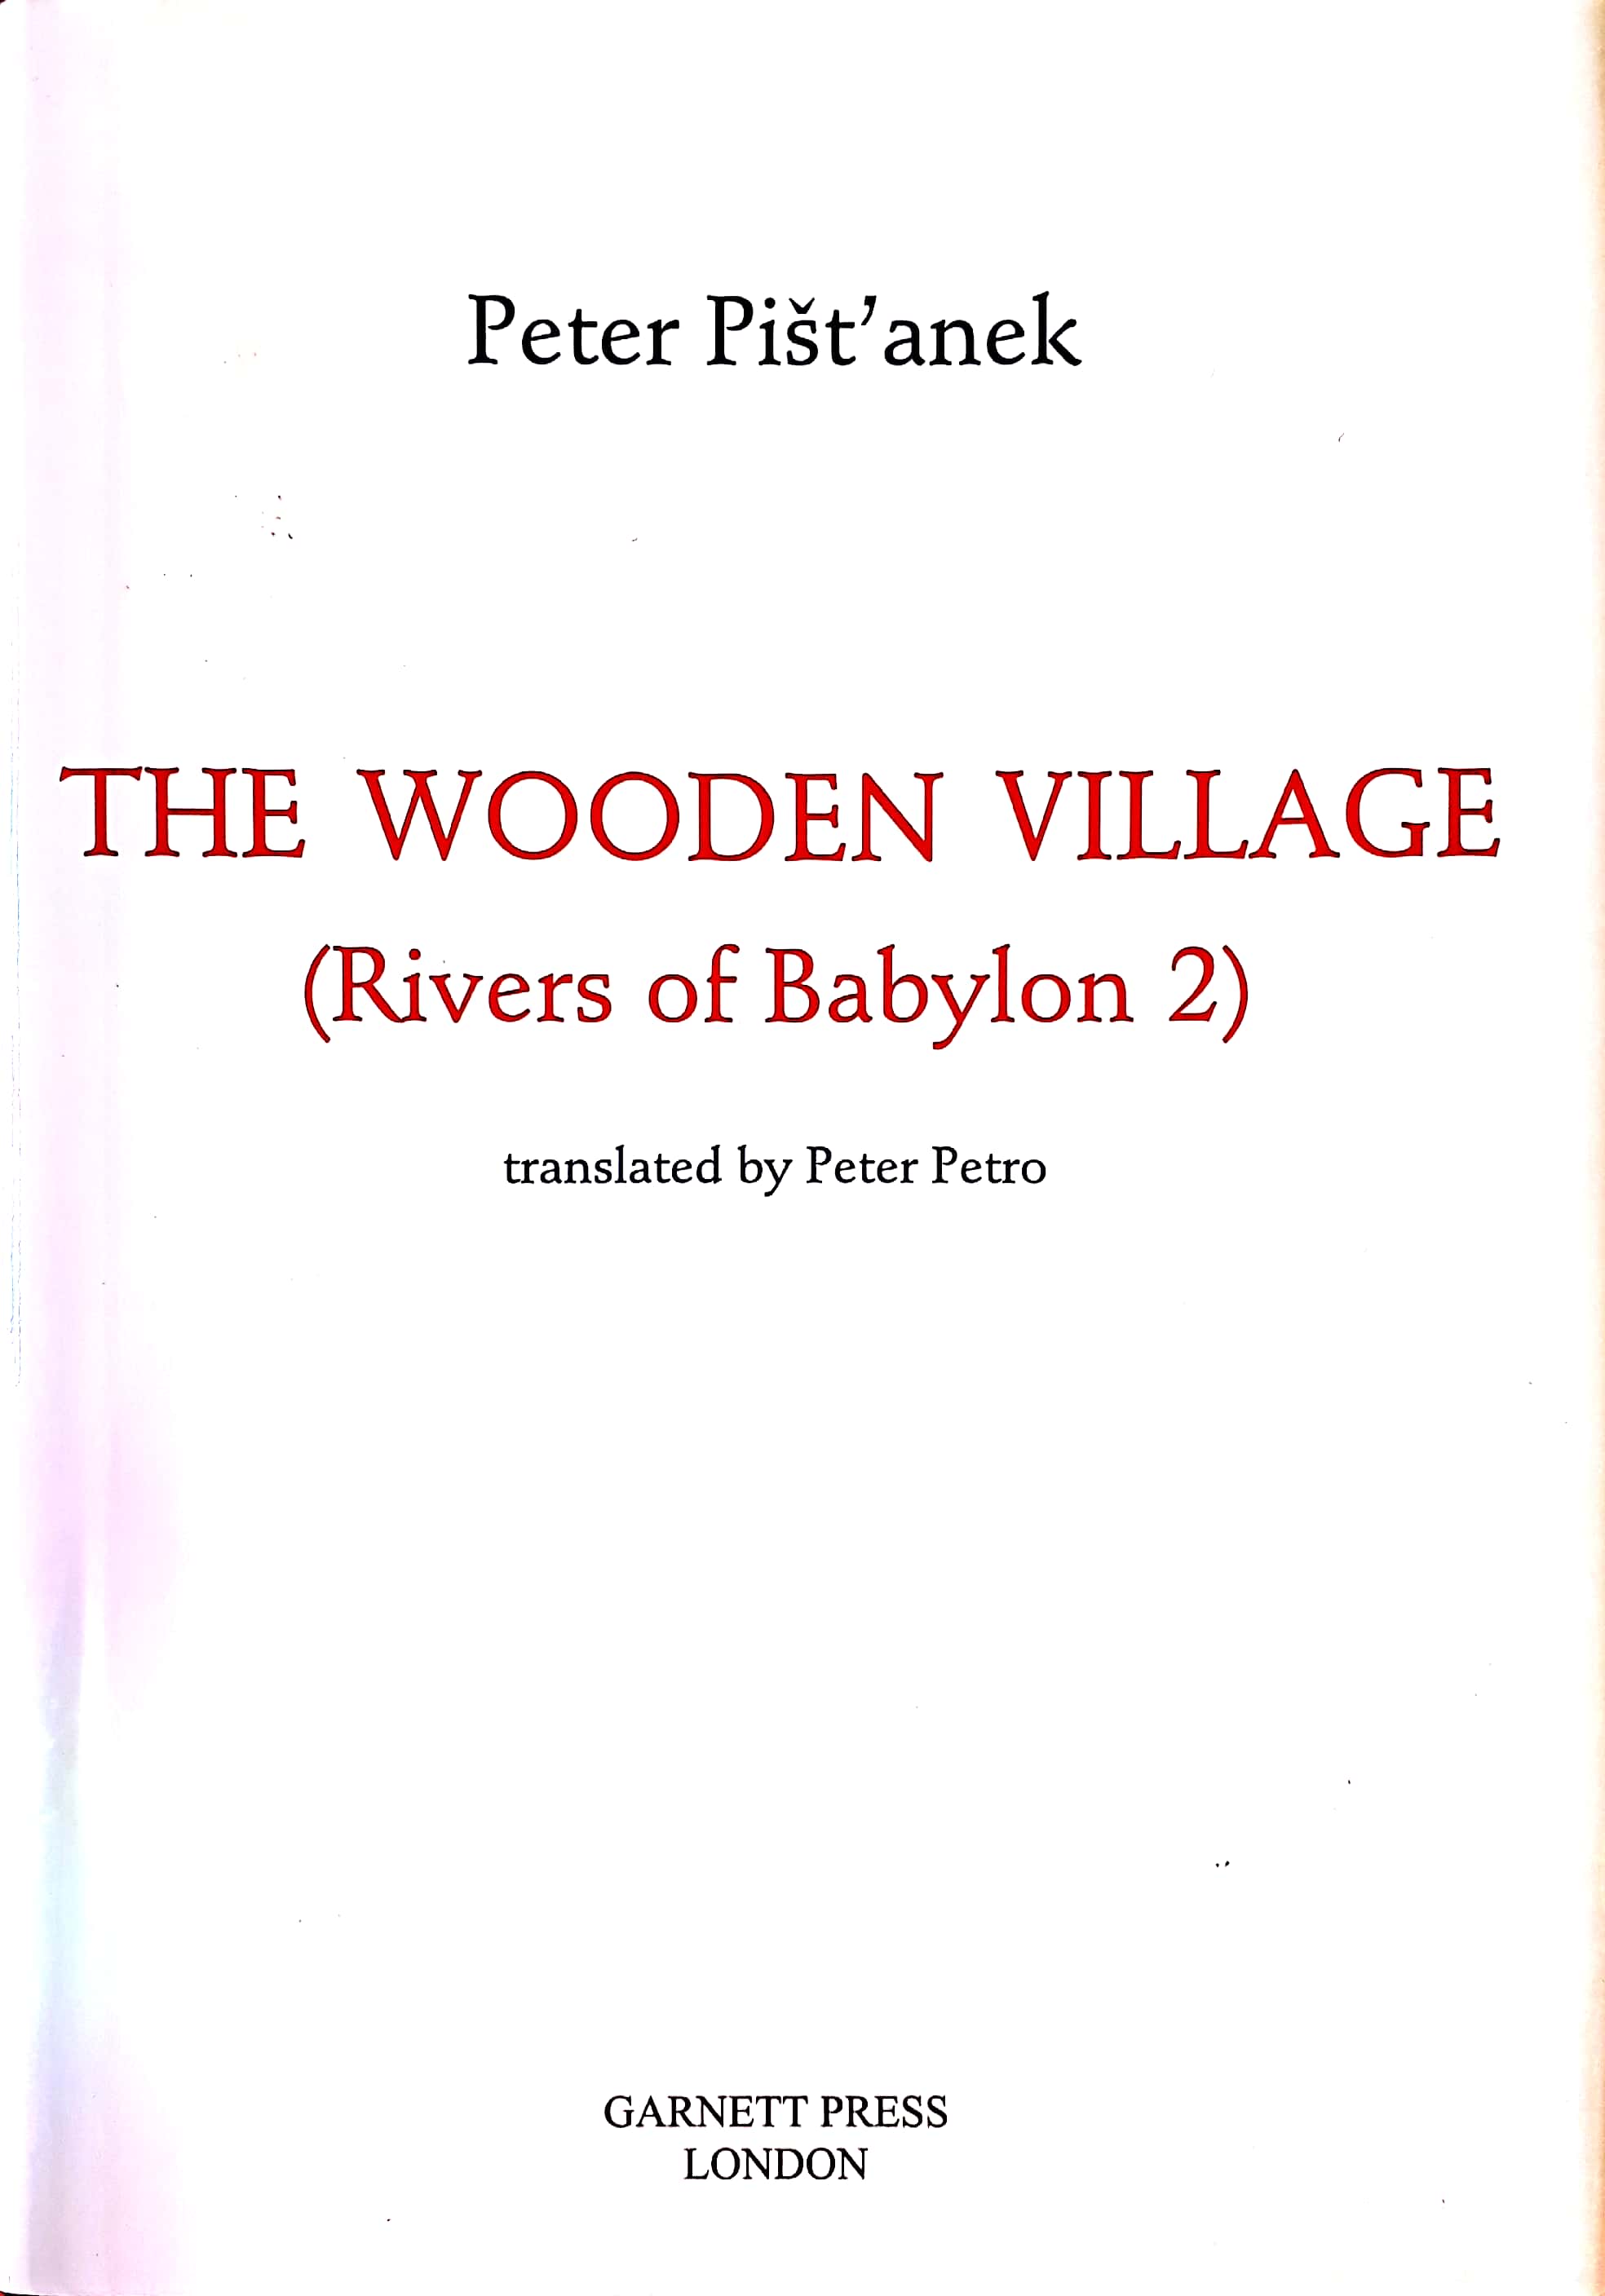 front cover of Peter Pistanek – The Wooden Village Rivers of Babylon 2